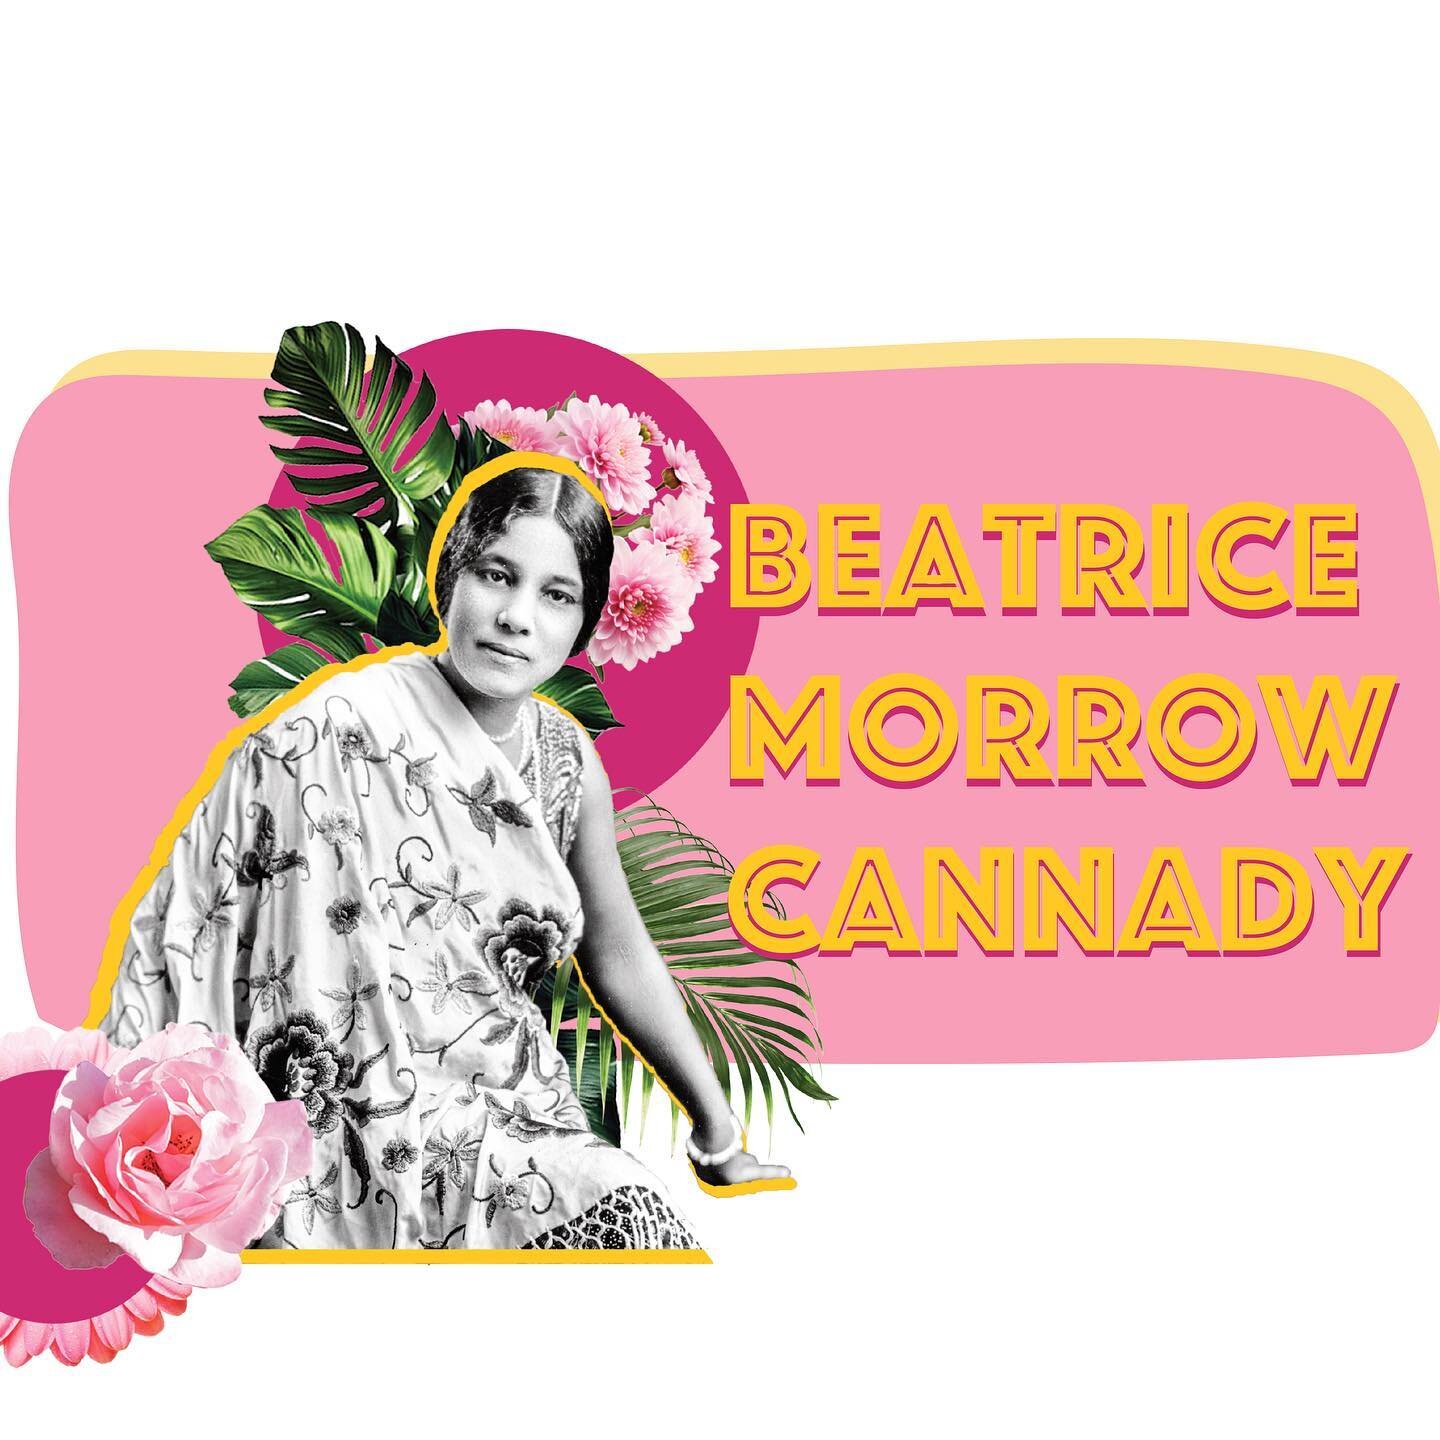 Meet Beatrice Morrow Cannady: interracial tea party hostess, a voice for justice, and a pillar of Portland&rsquo;s history. As the fearless editor of The Advocate (an independent Black owned newspaper), she paved the way for civil rights in Oregon, l